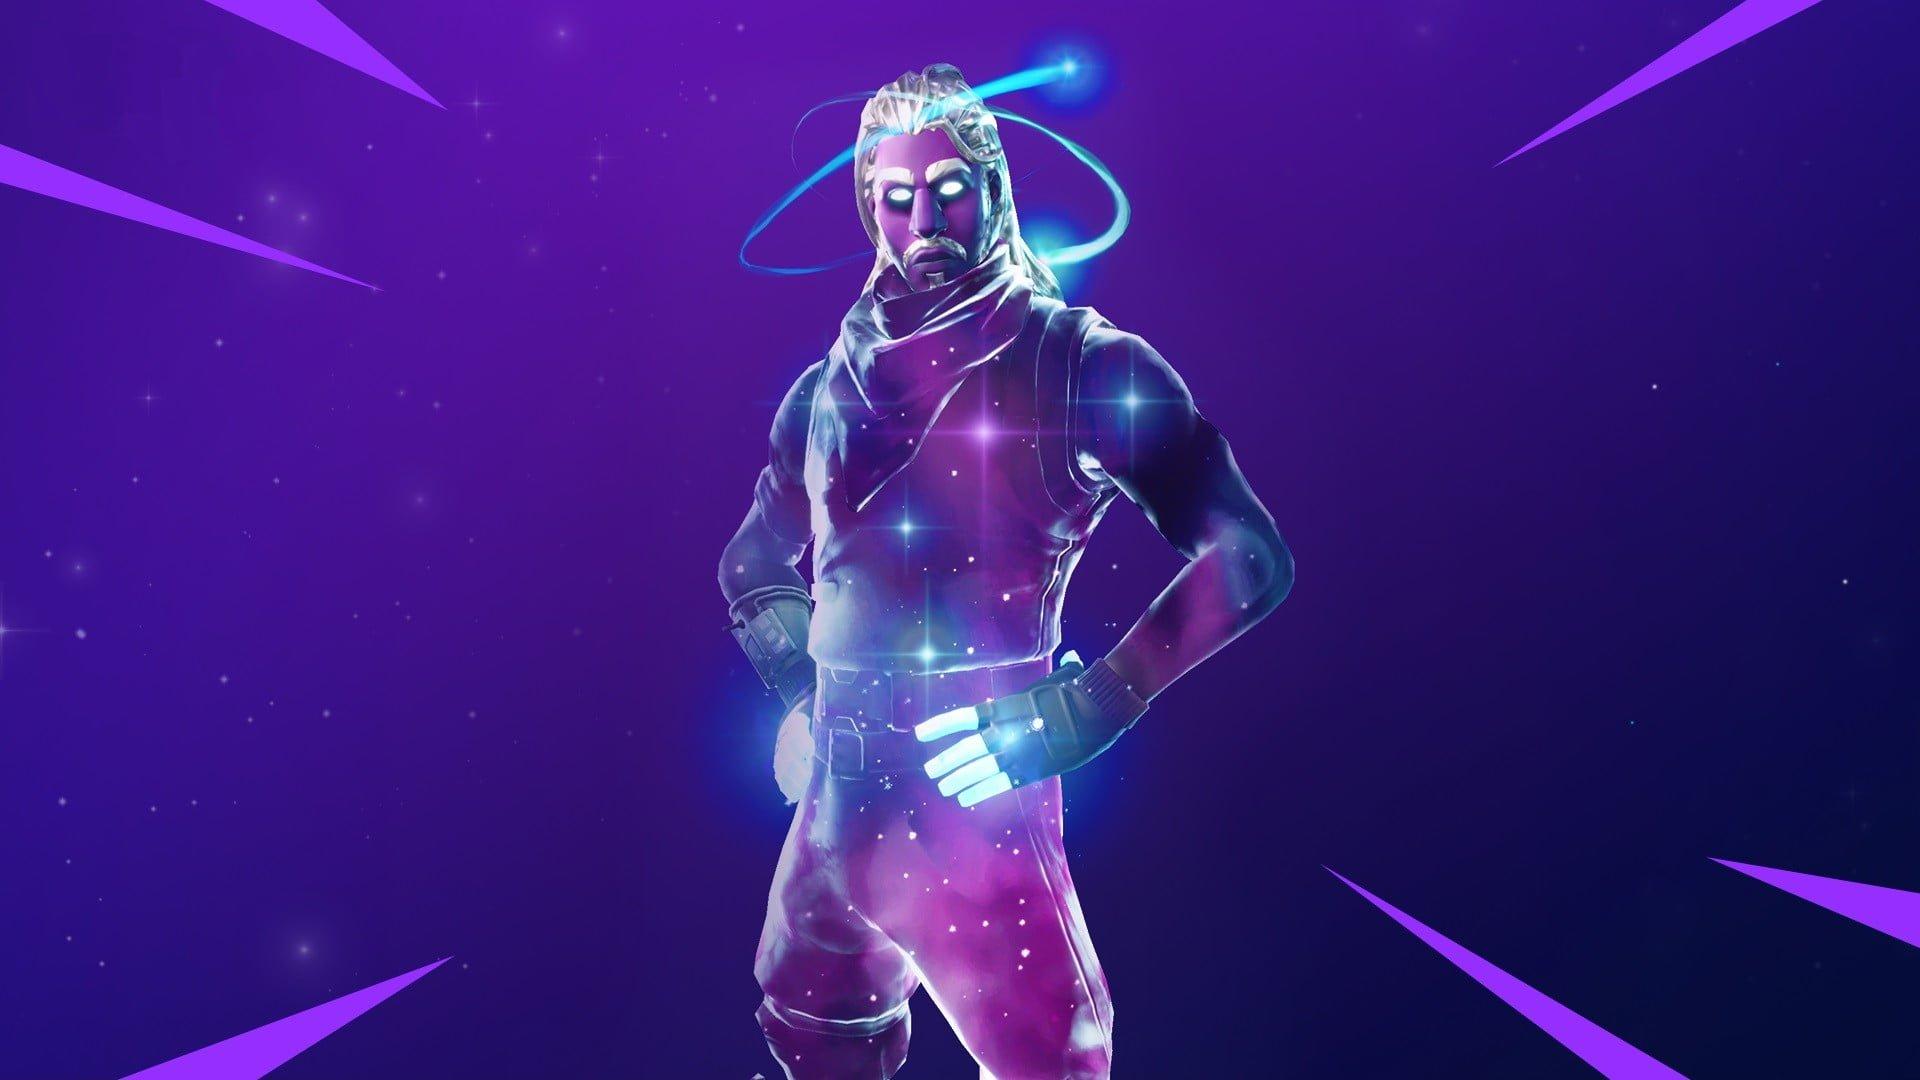 Can you still get Galaxy skin in Fortnite? No, but there's a new